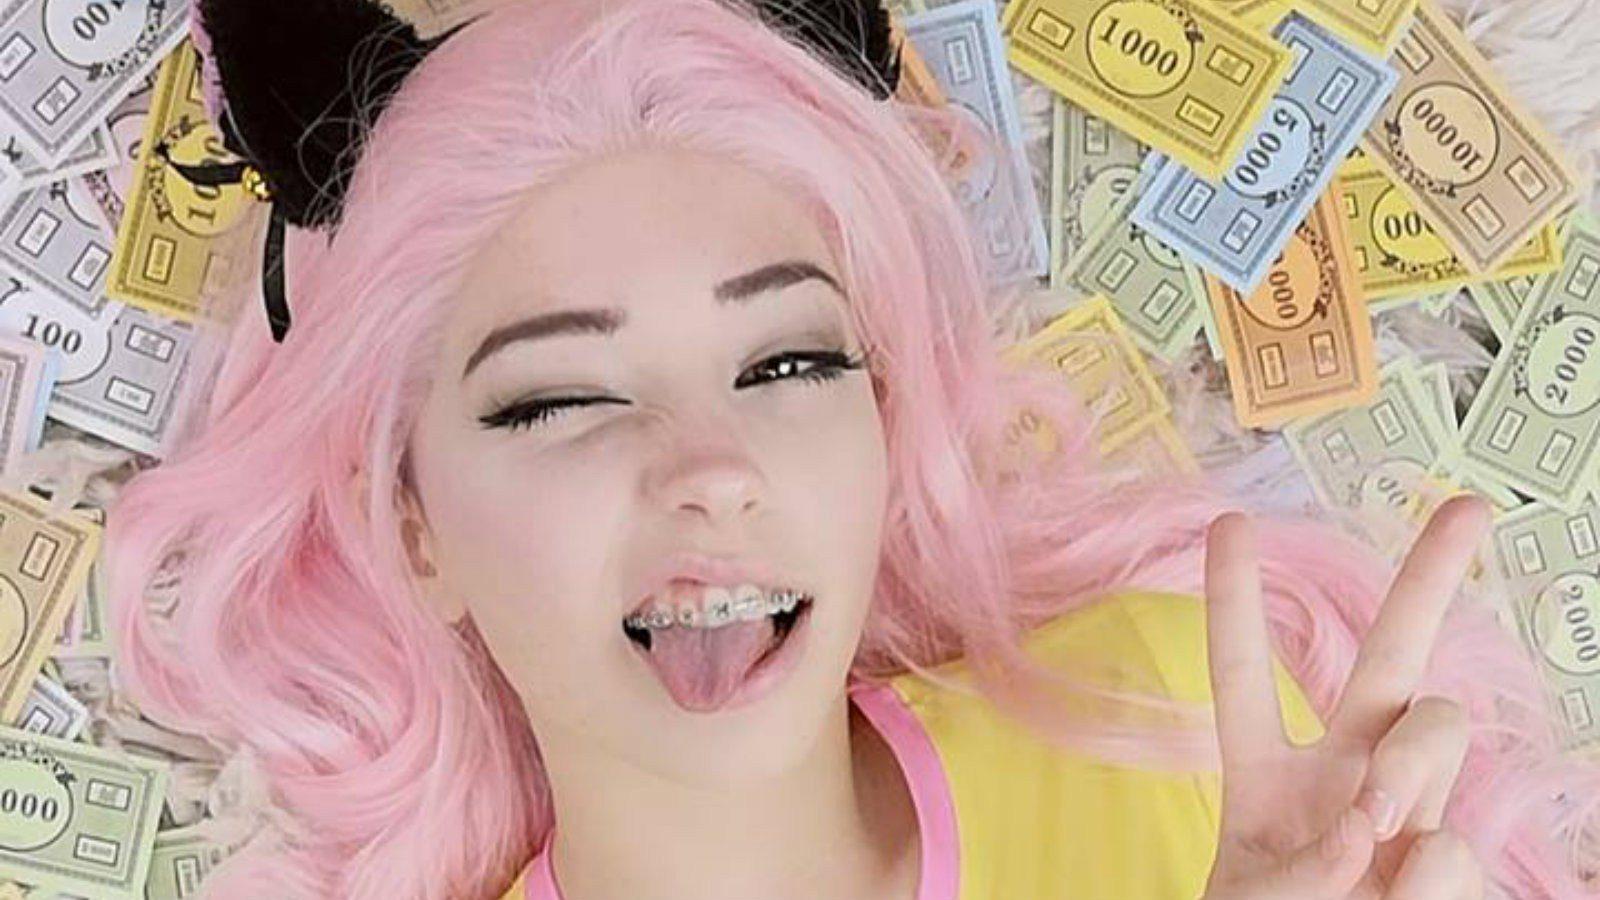 Technology News - Cosplayer Belle Delphine trolled her followers